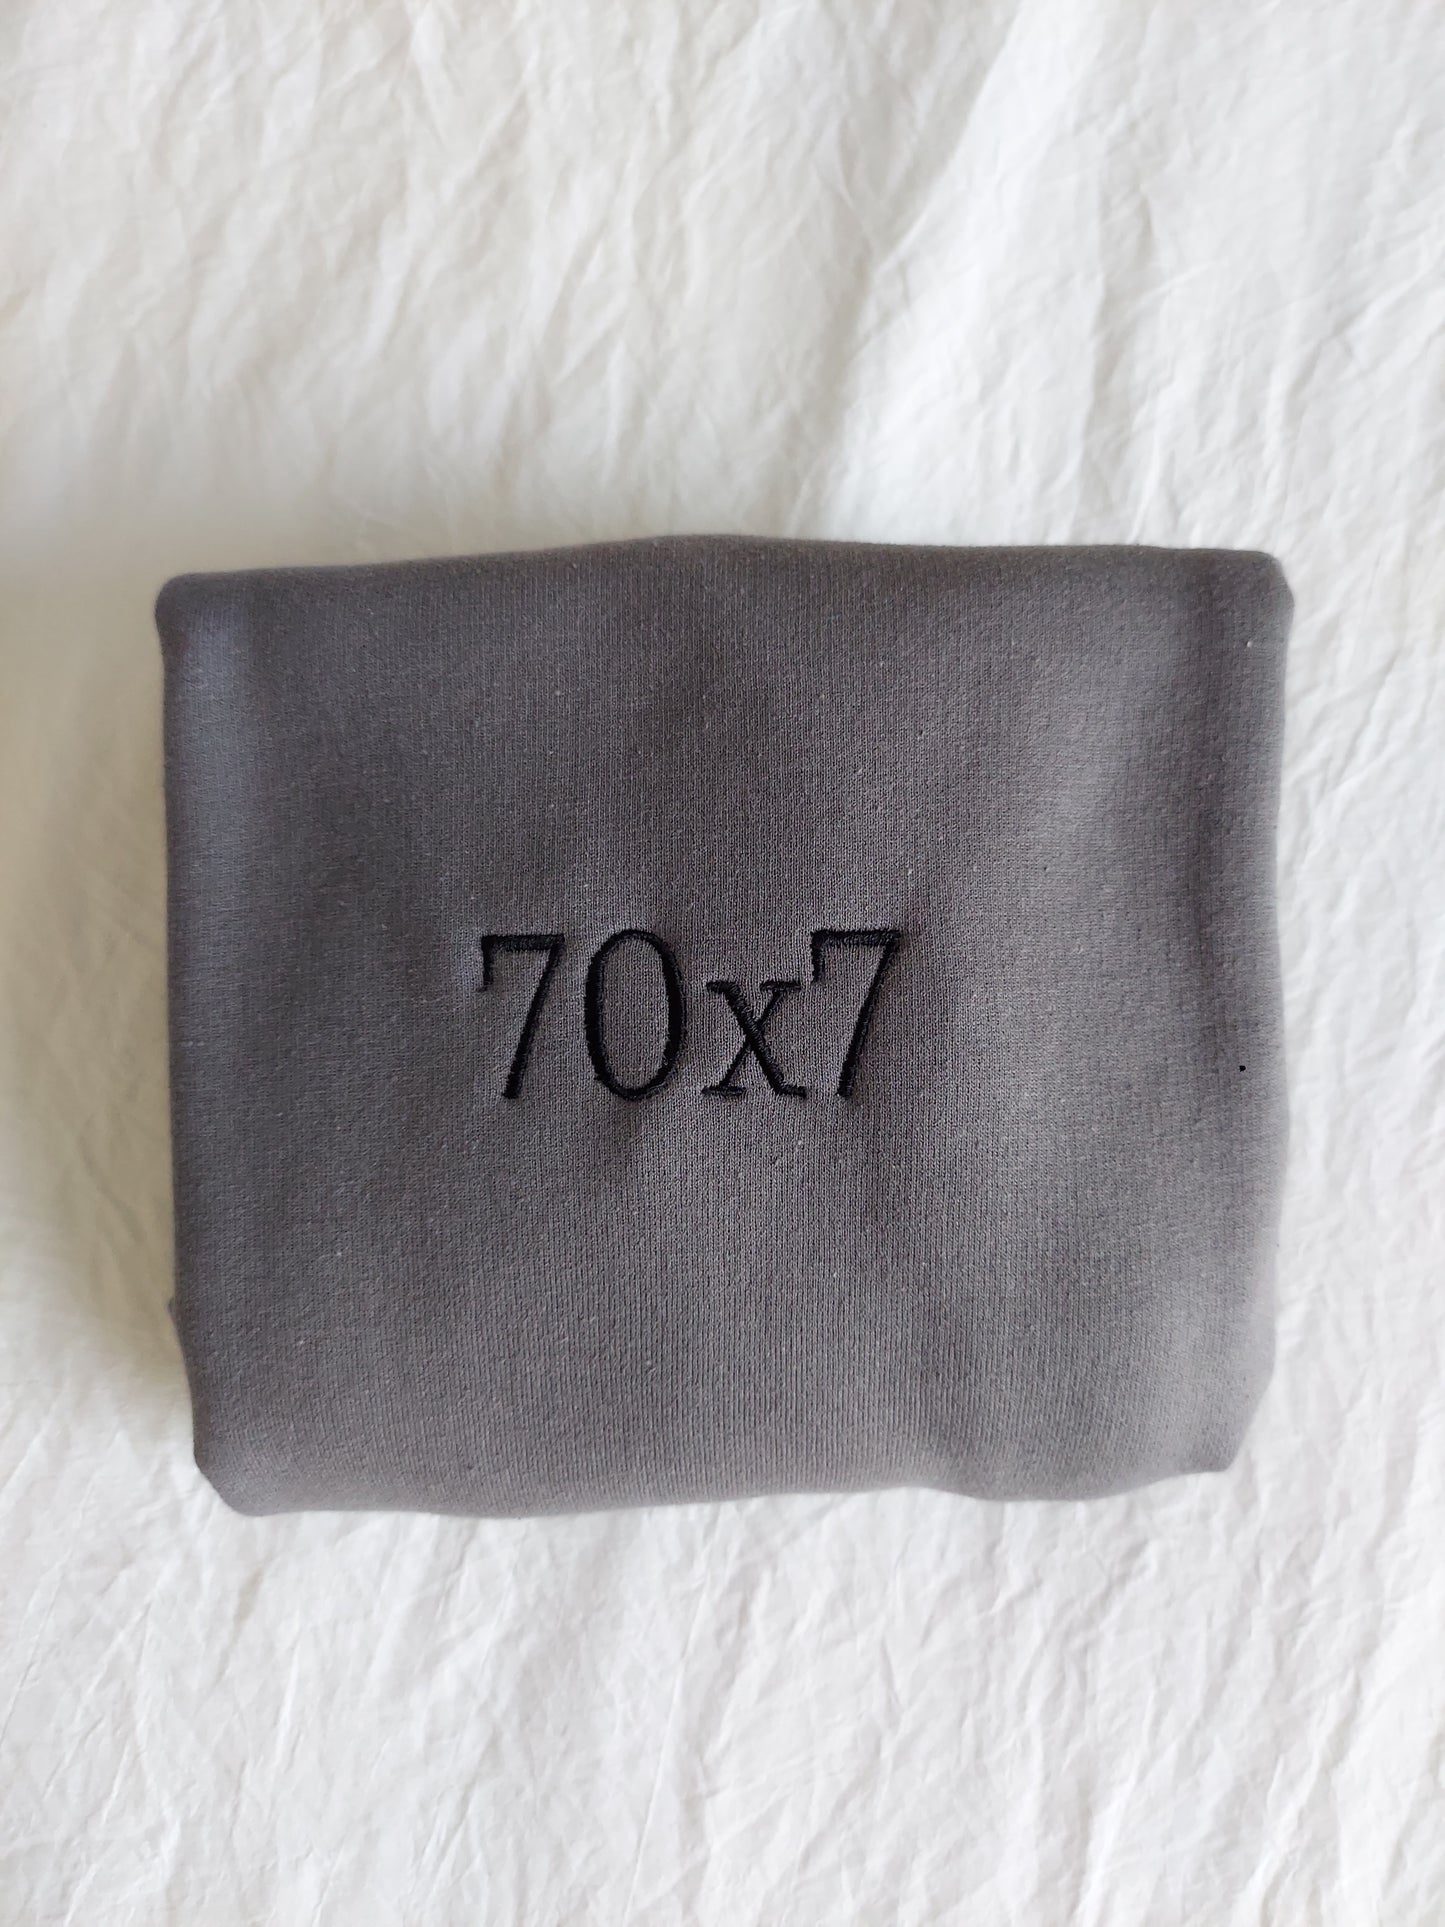 70x7 Embroidered Crew / Gray